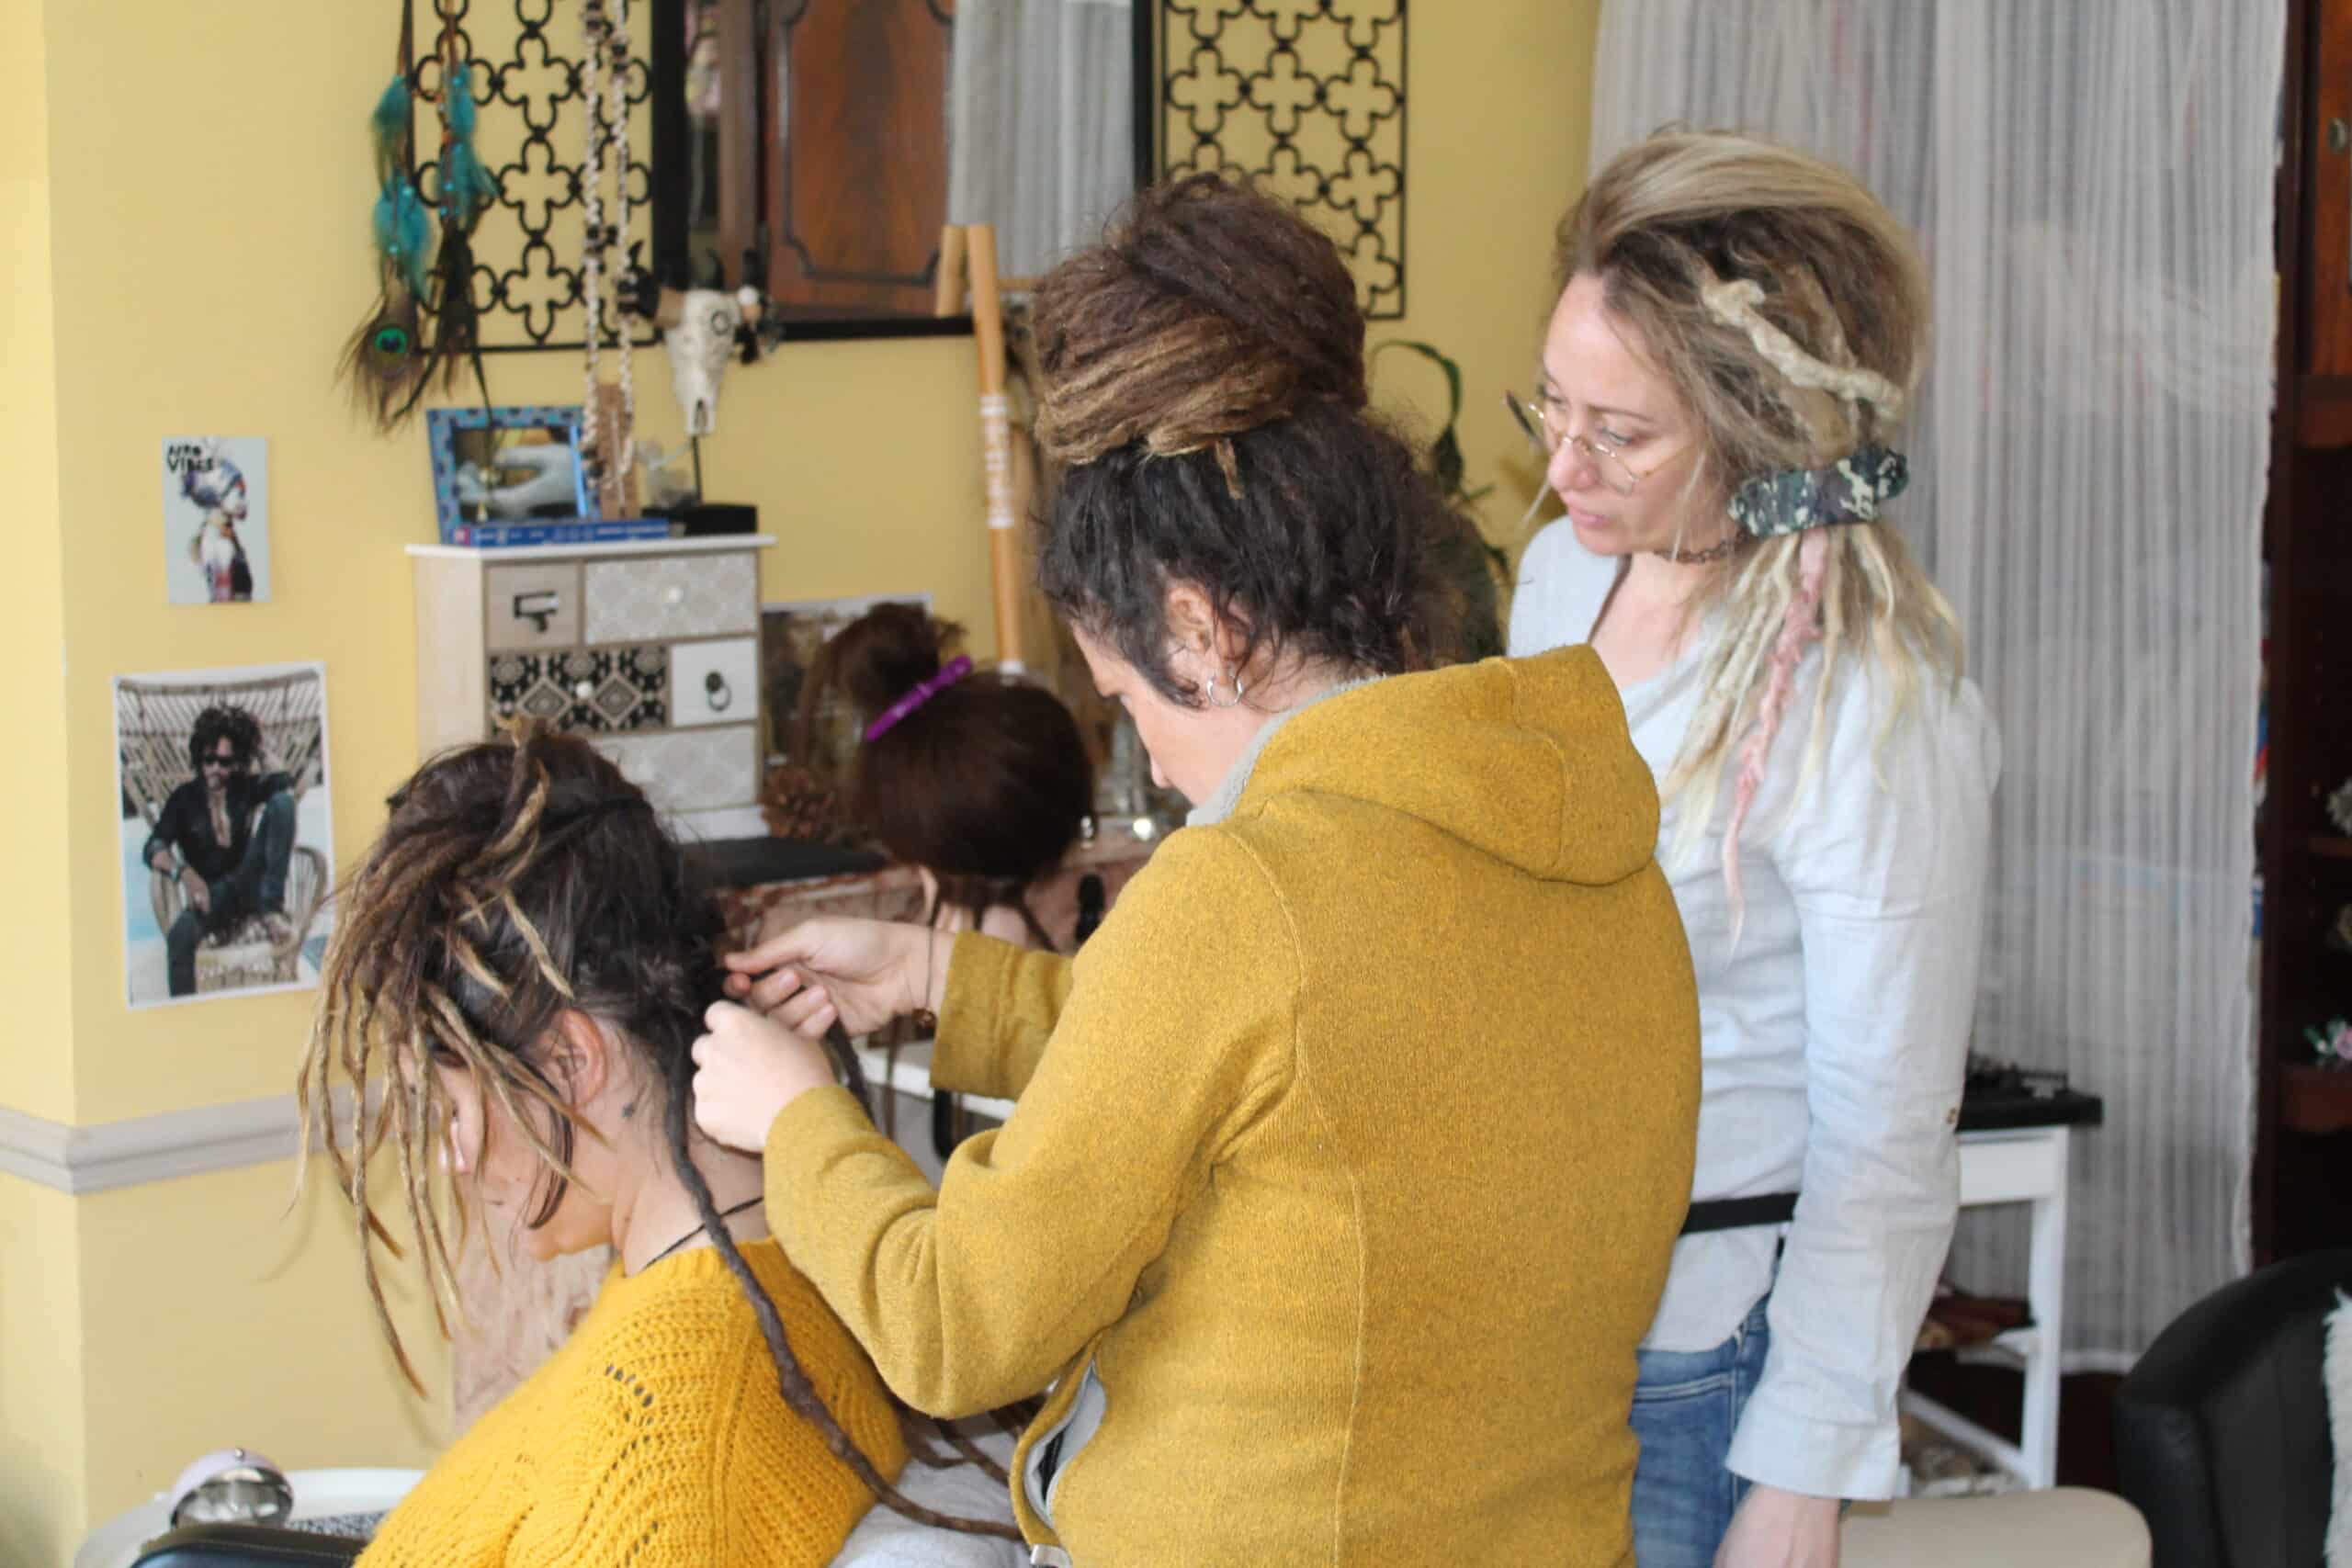 Learn how to create and maintain natural dreadlocksTraining for natural dreadlocks enthusiastsFrom beginners to hair professionals.